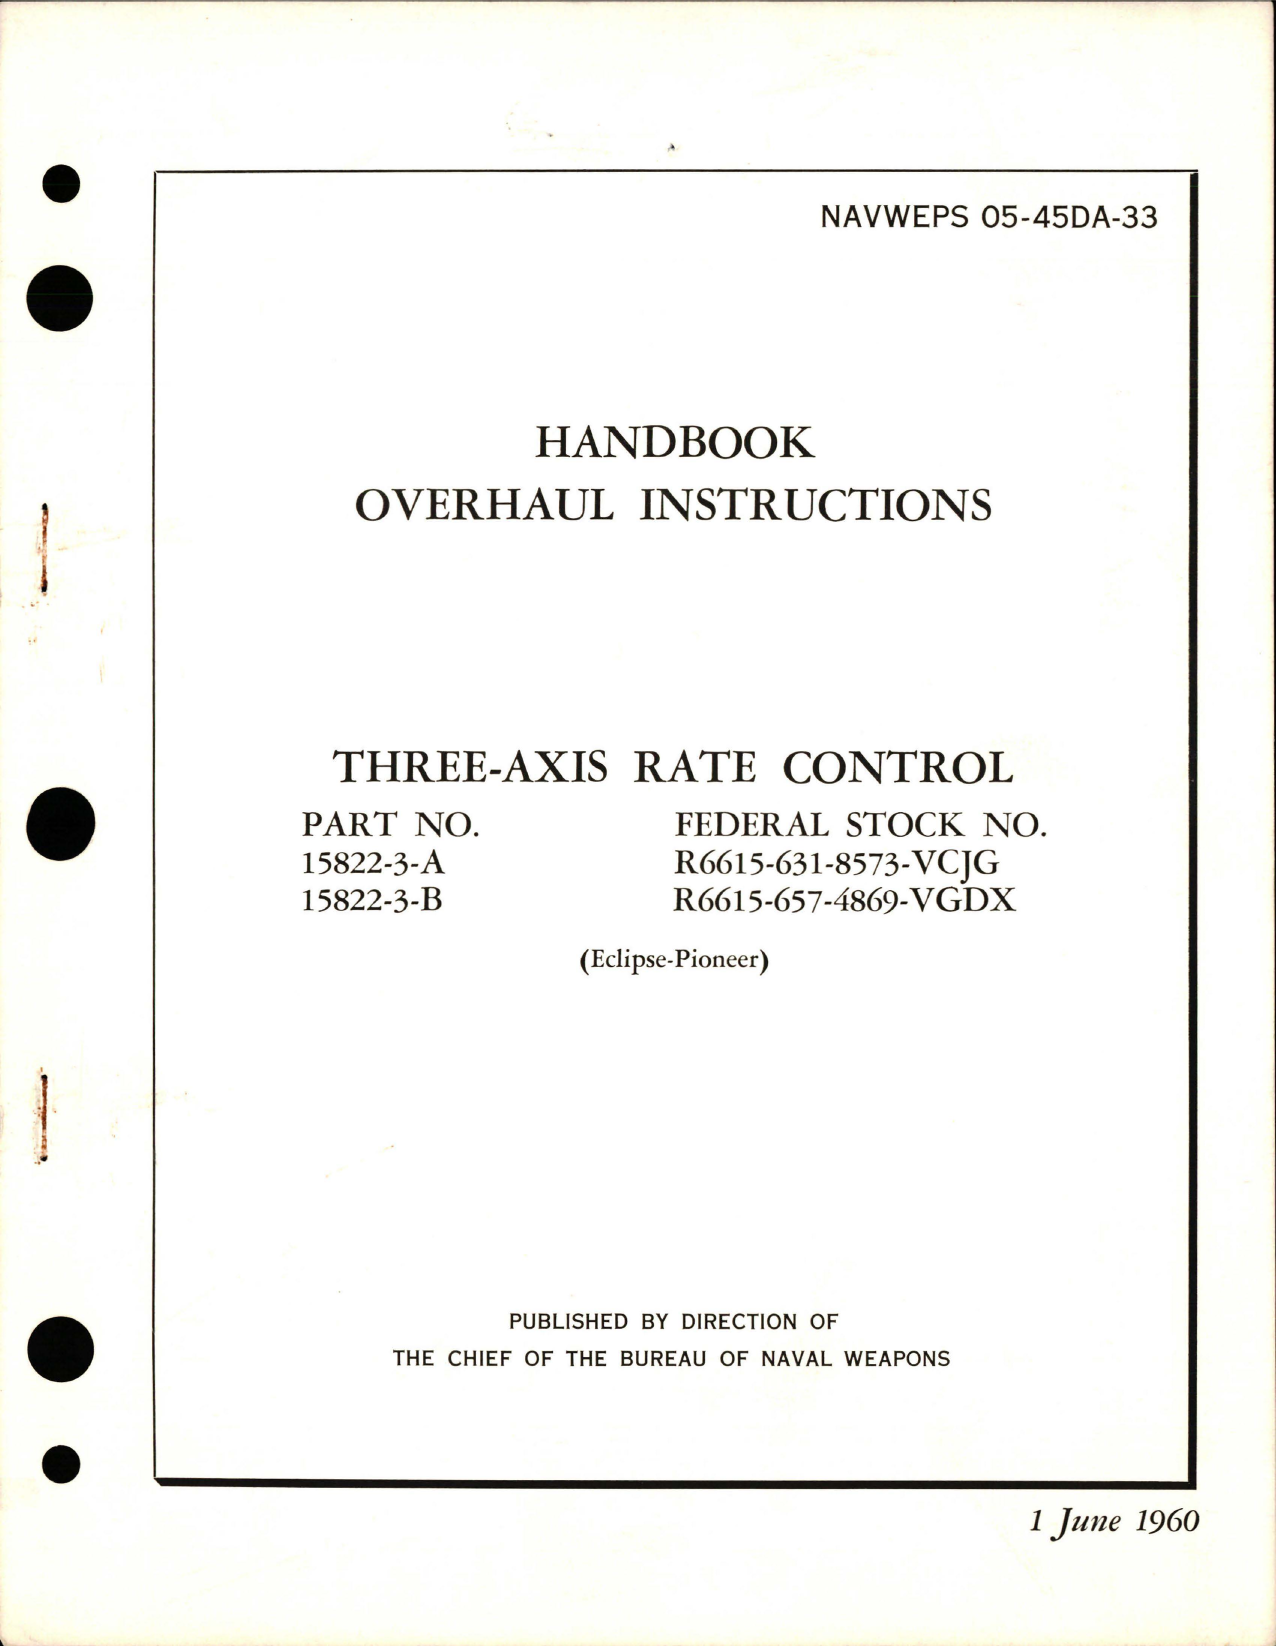 Sample page 1 from AirCorps Library document: Overhaul Instructions for Three Axis Rate Control - Parts 15822-3-A and 15822-3-B